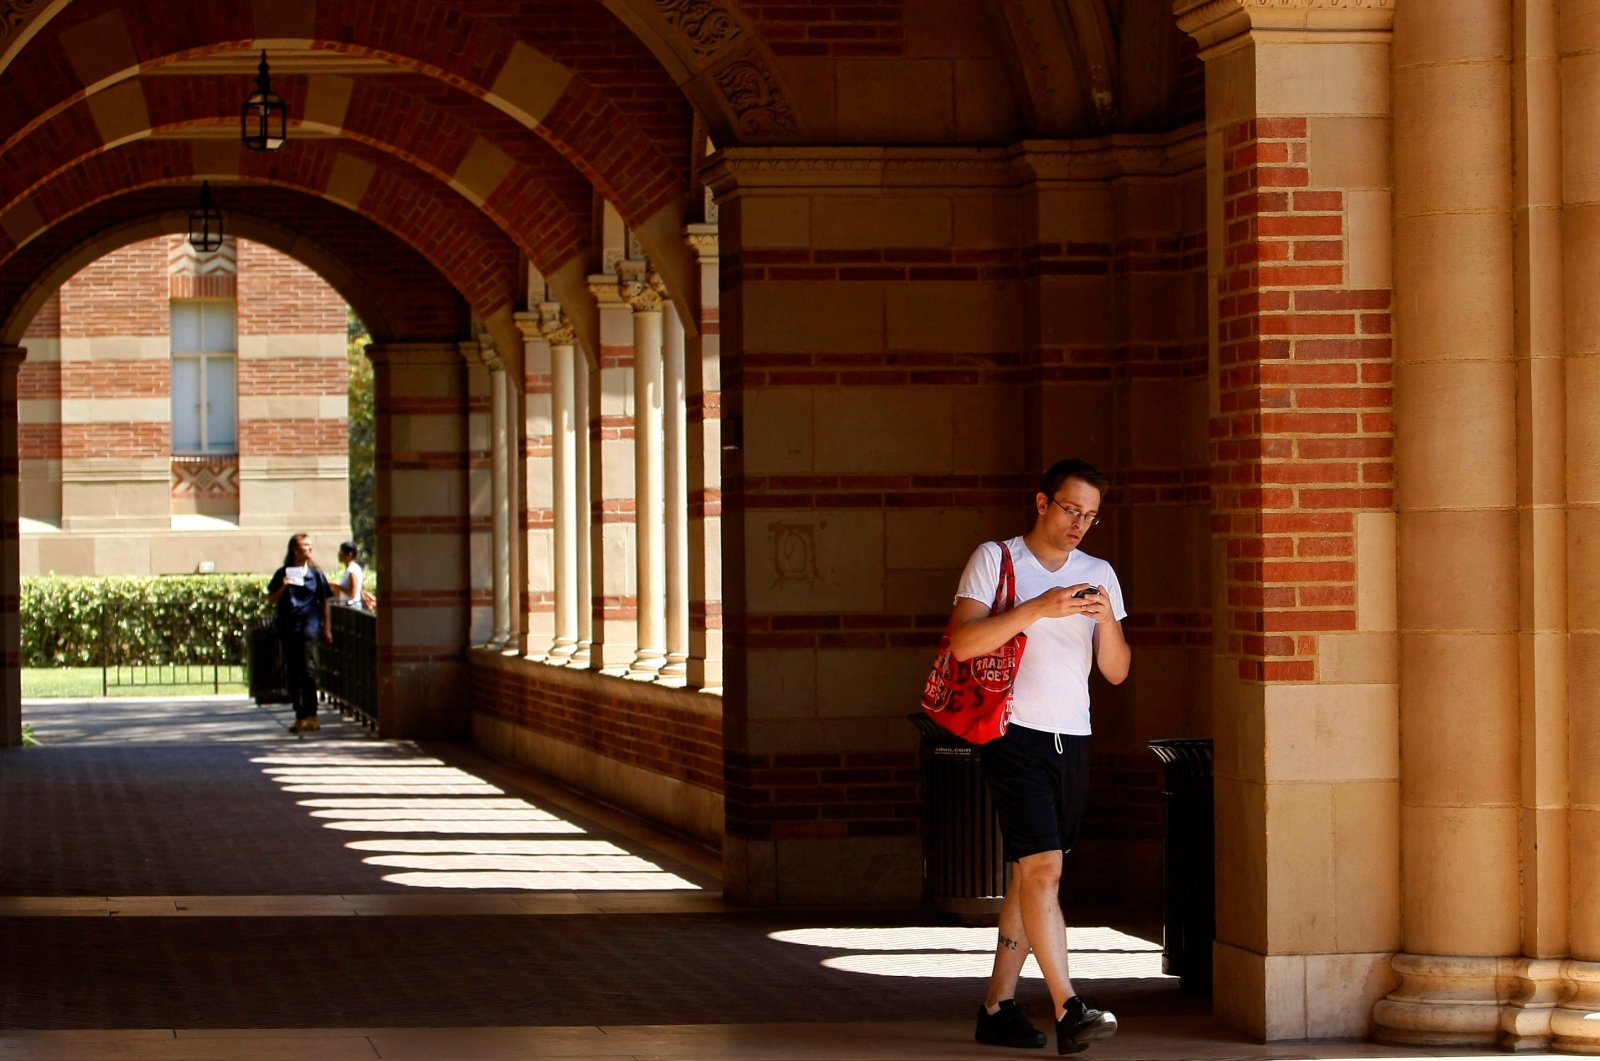 A student walks in the University of California Los Angeles (UCLA) campus in Los Angeles, U.S., Sept. 18, 2009. (Reuters Photo)